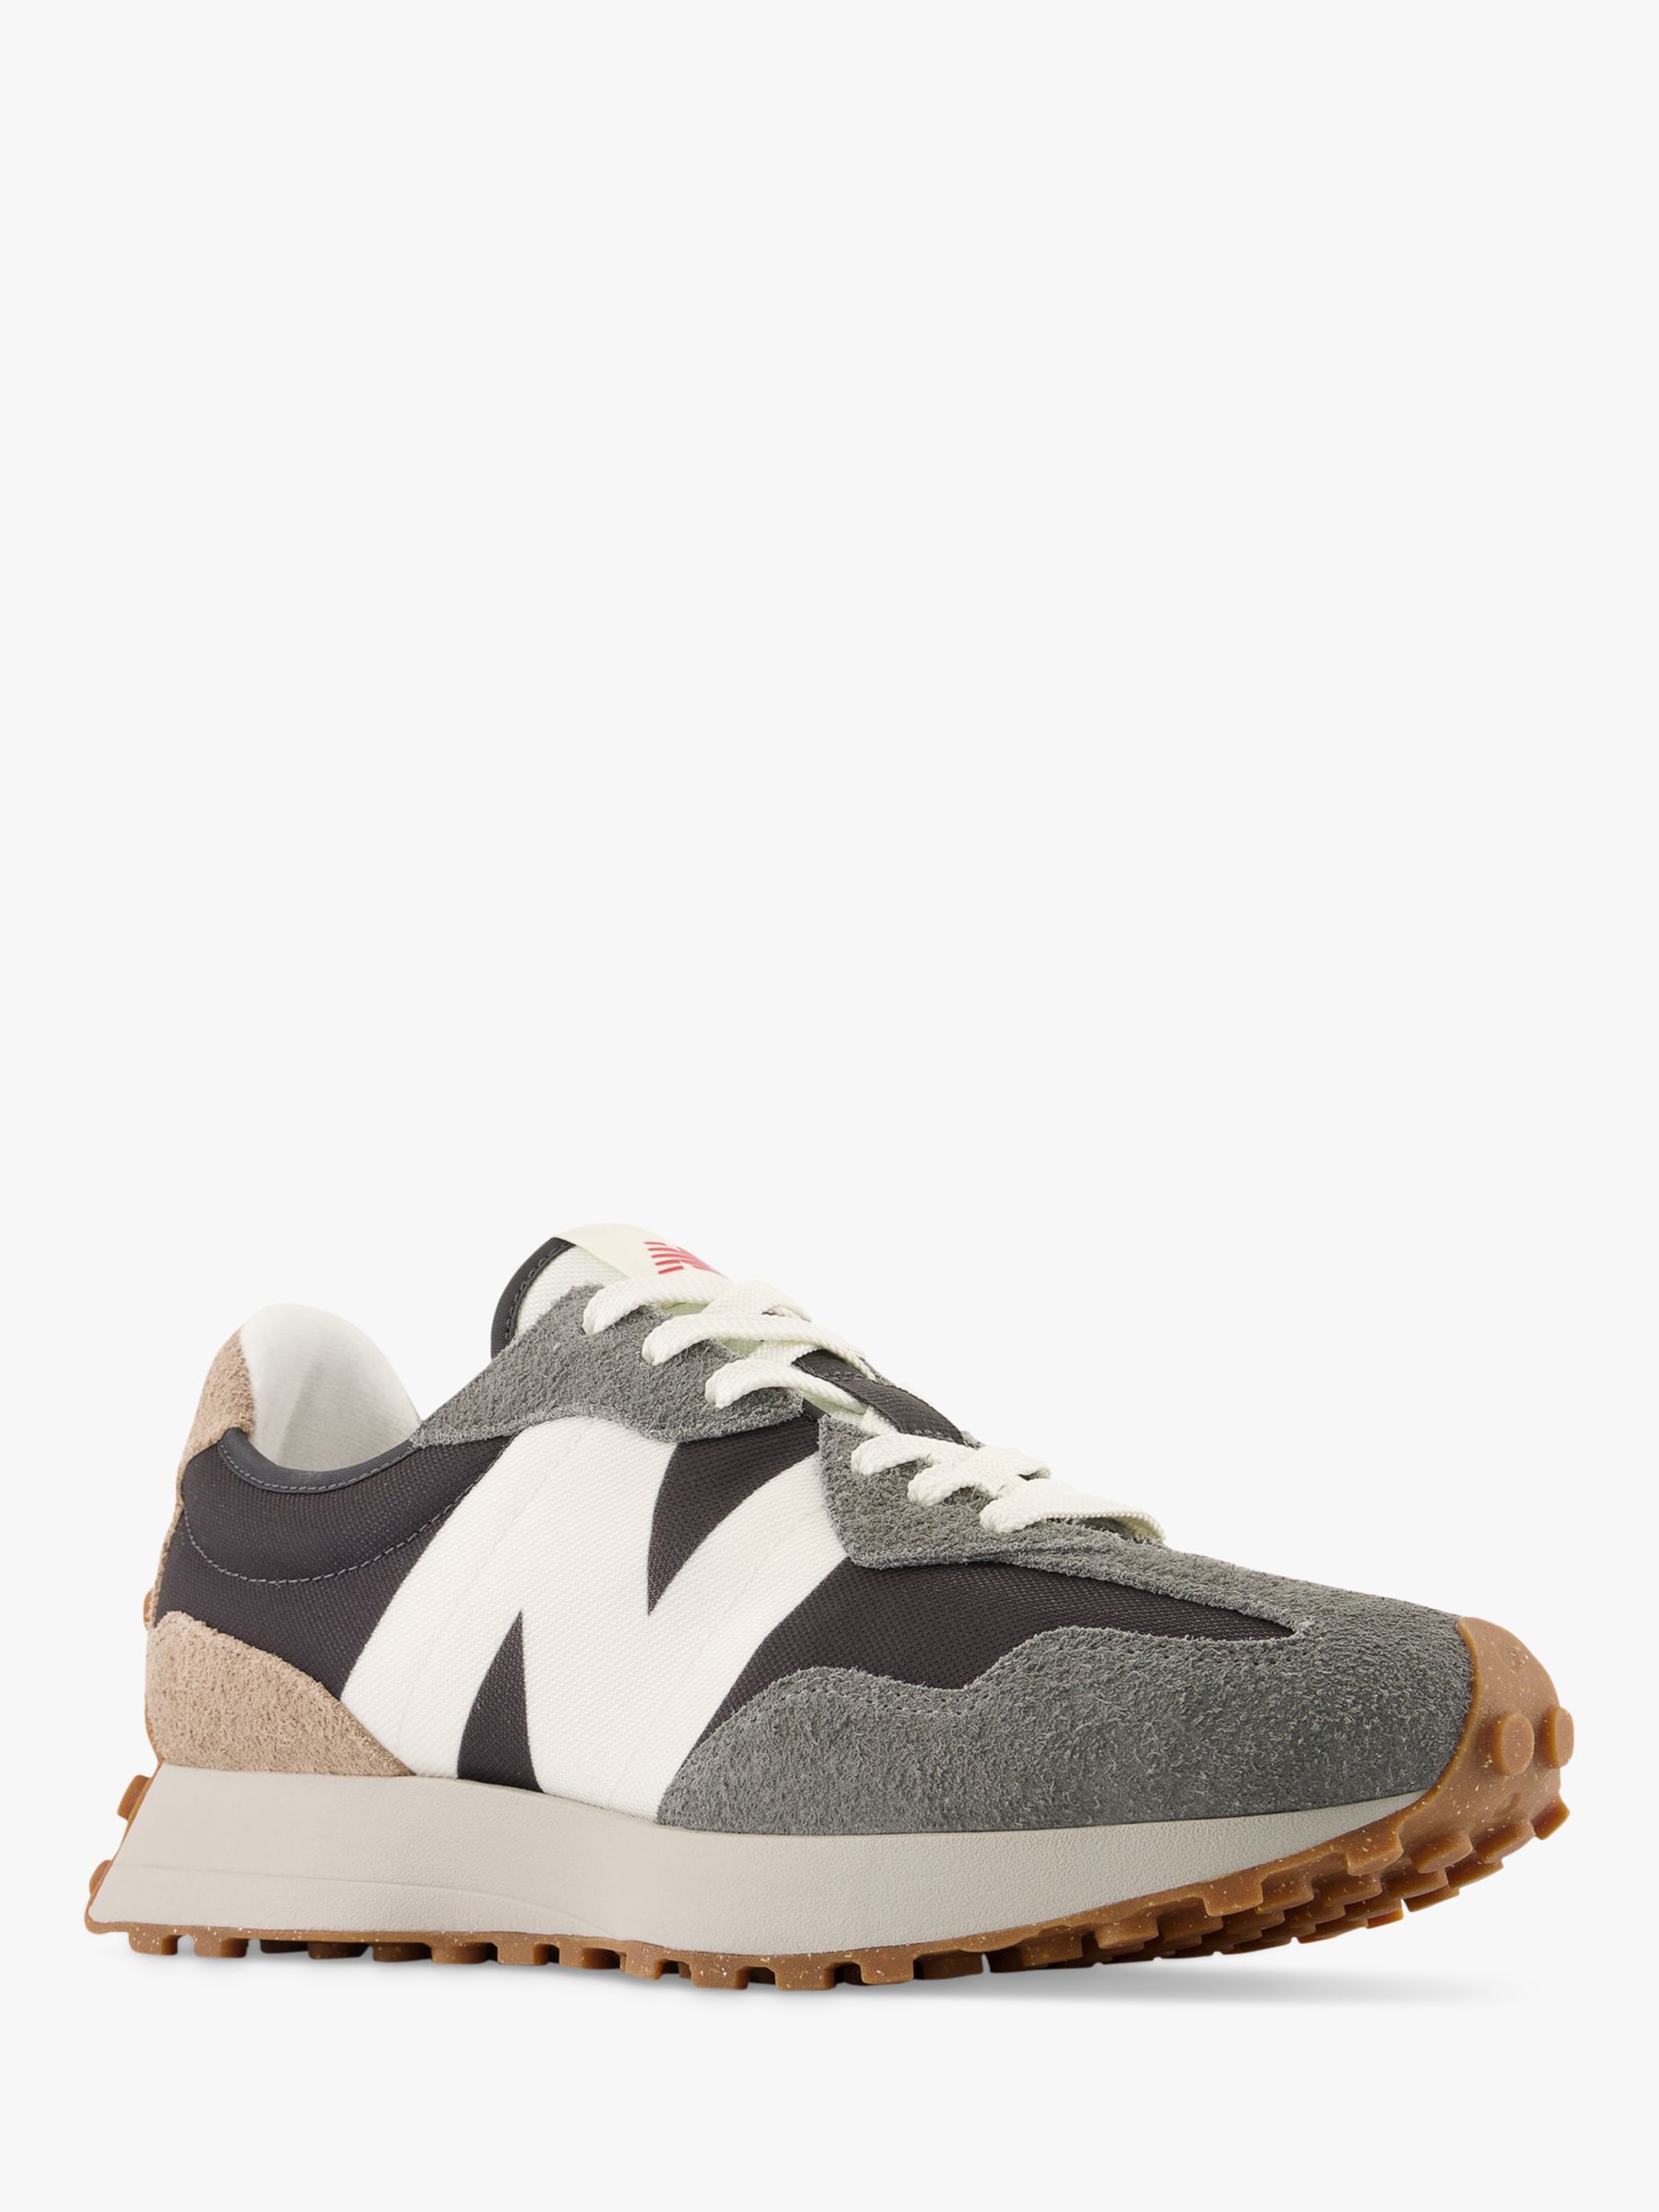 New Balance 327 Retro Suede Trainers, Harbour Grey, 7